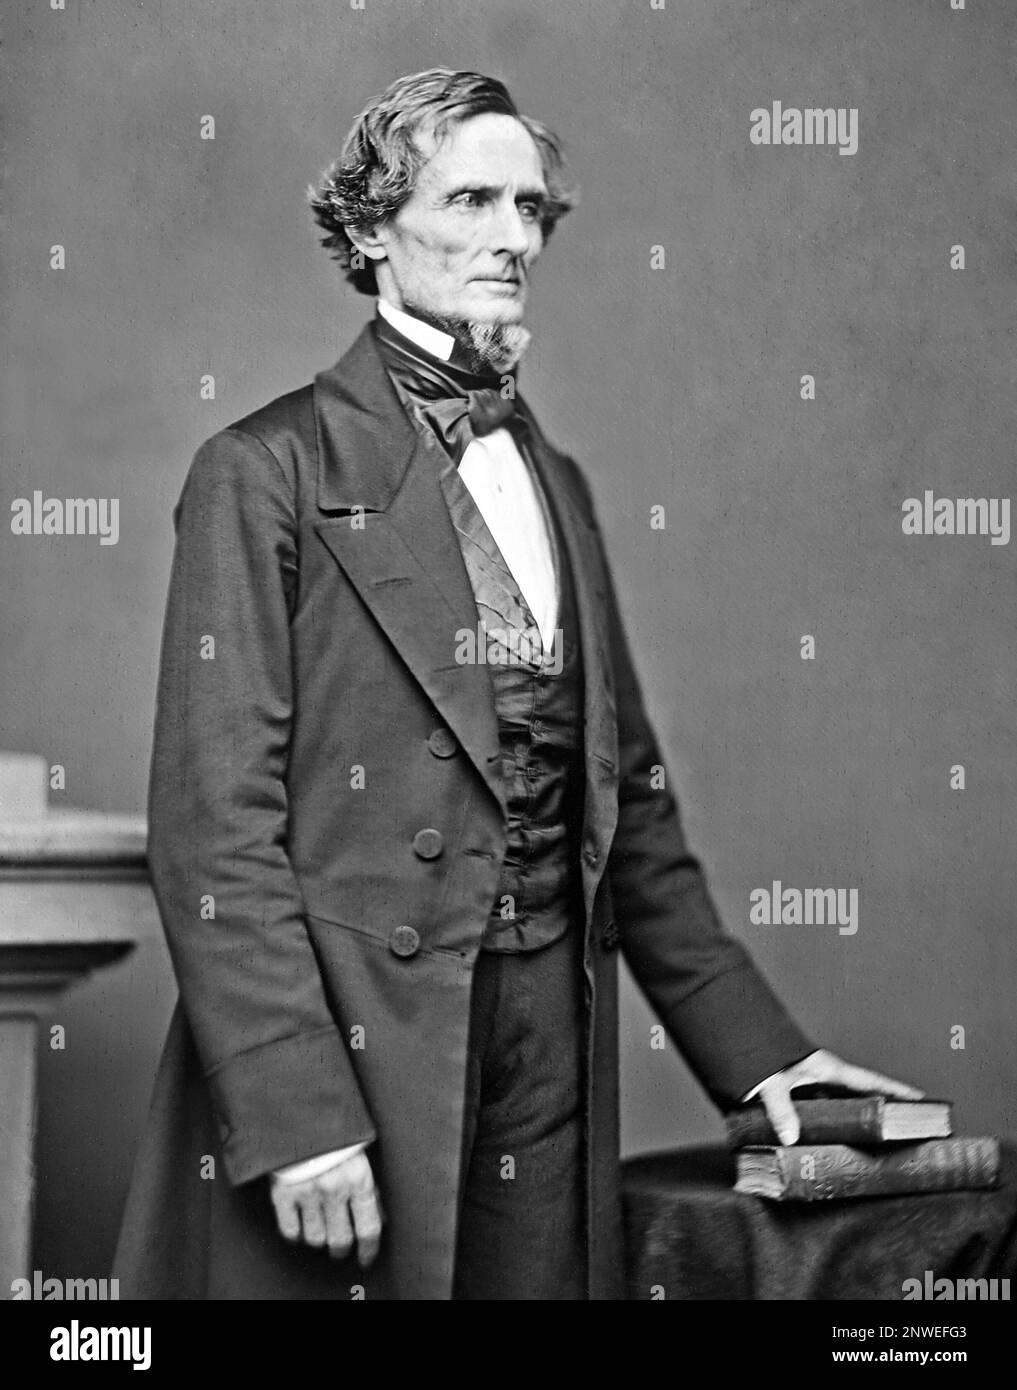 Jefferson F. Davis (1808 – 1889) American politician who served as the first and only president of the Confederate States from 1861 to 1865. Stock Photo